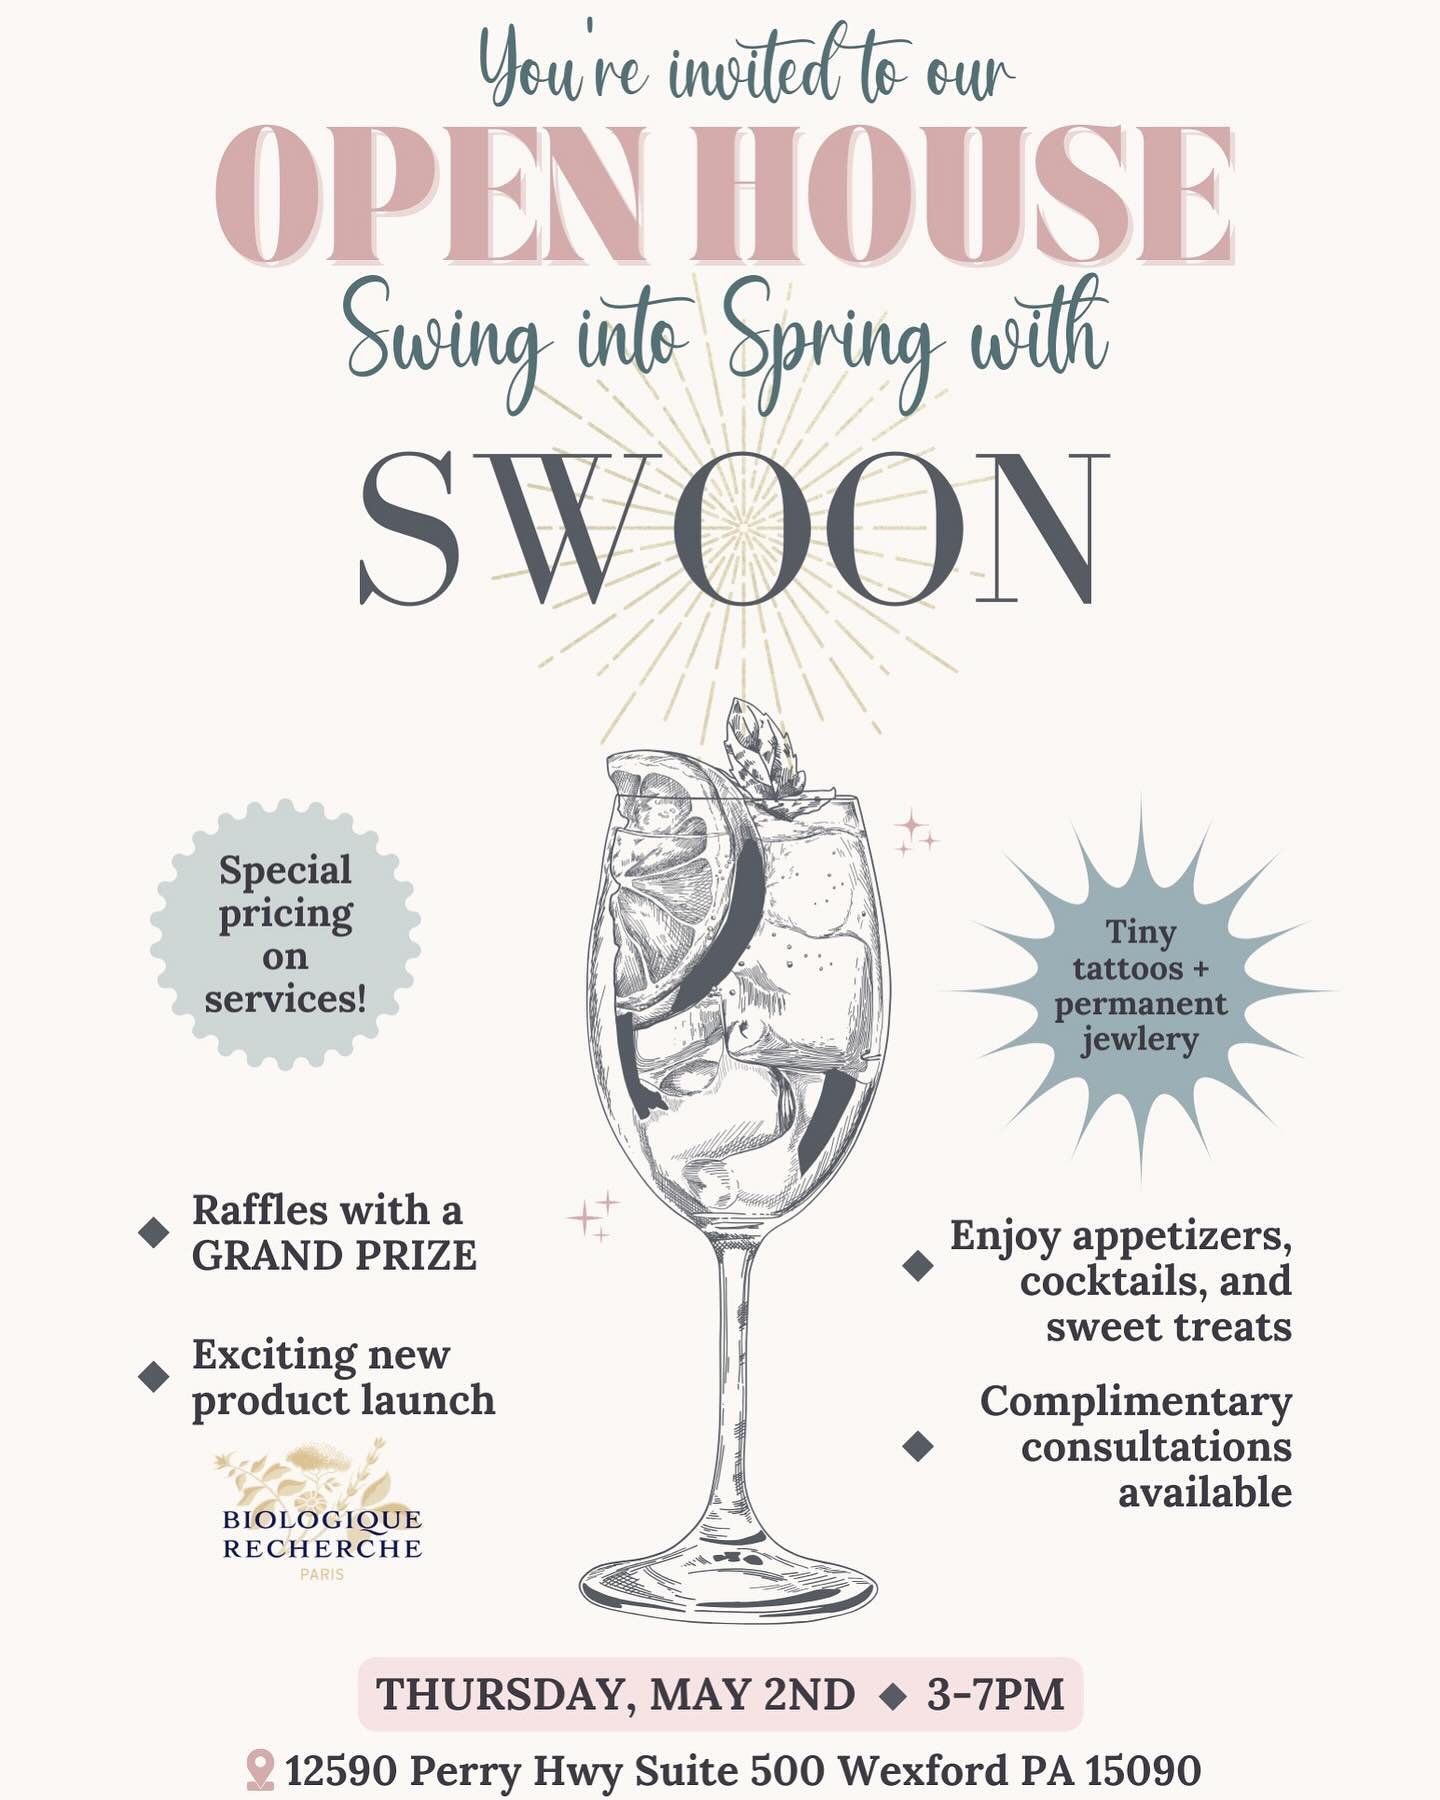 We would love to invite you to our Spring Fling, an Open House on Thursday, May 2nd from 3-7pm! 🌸

Stop by for amazing offers on Botox, fillers, Emsculpt Neo, special pricing on our facial services, and receive a complimentary skin analysis!

Enjoy 